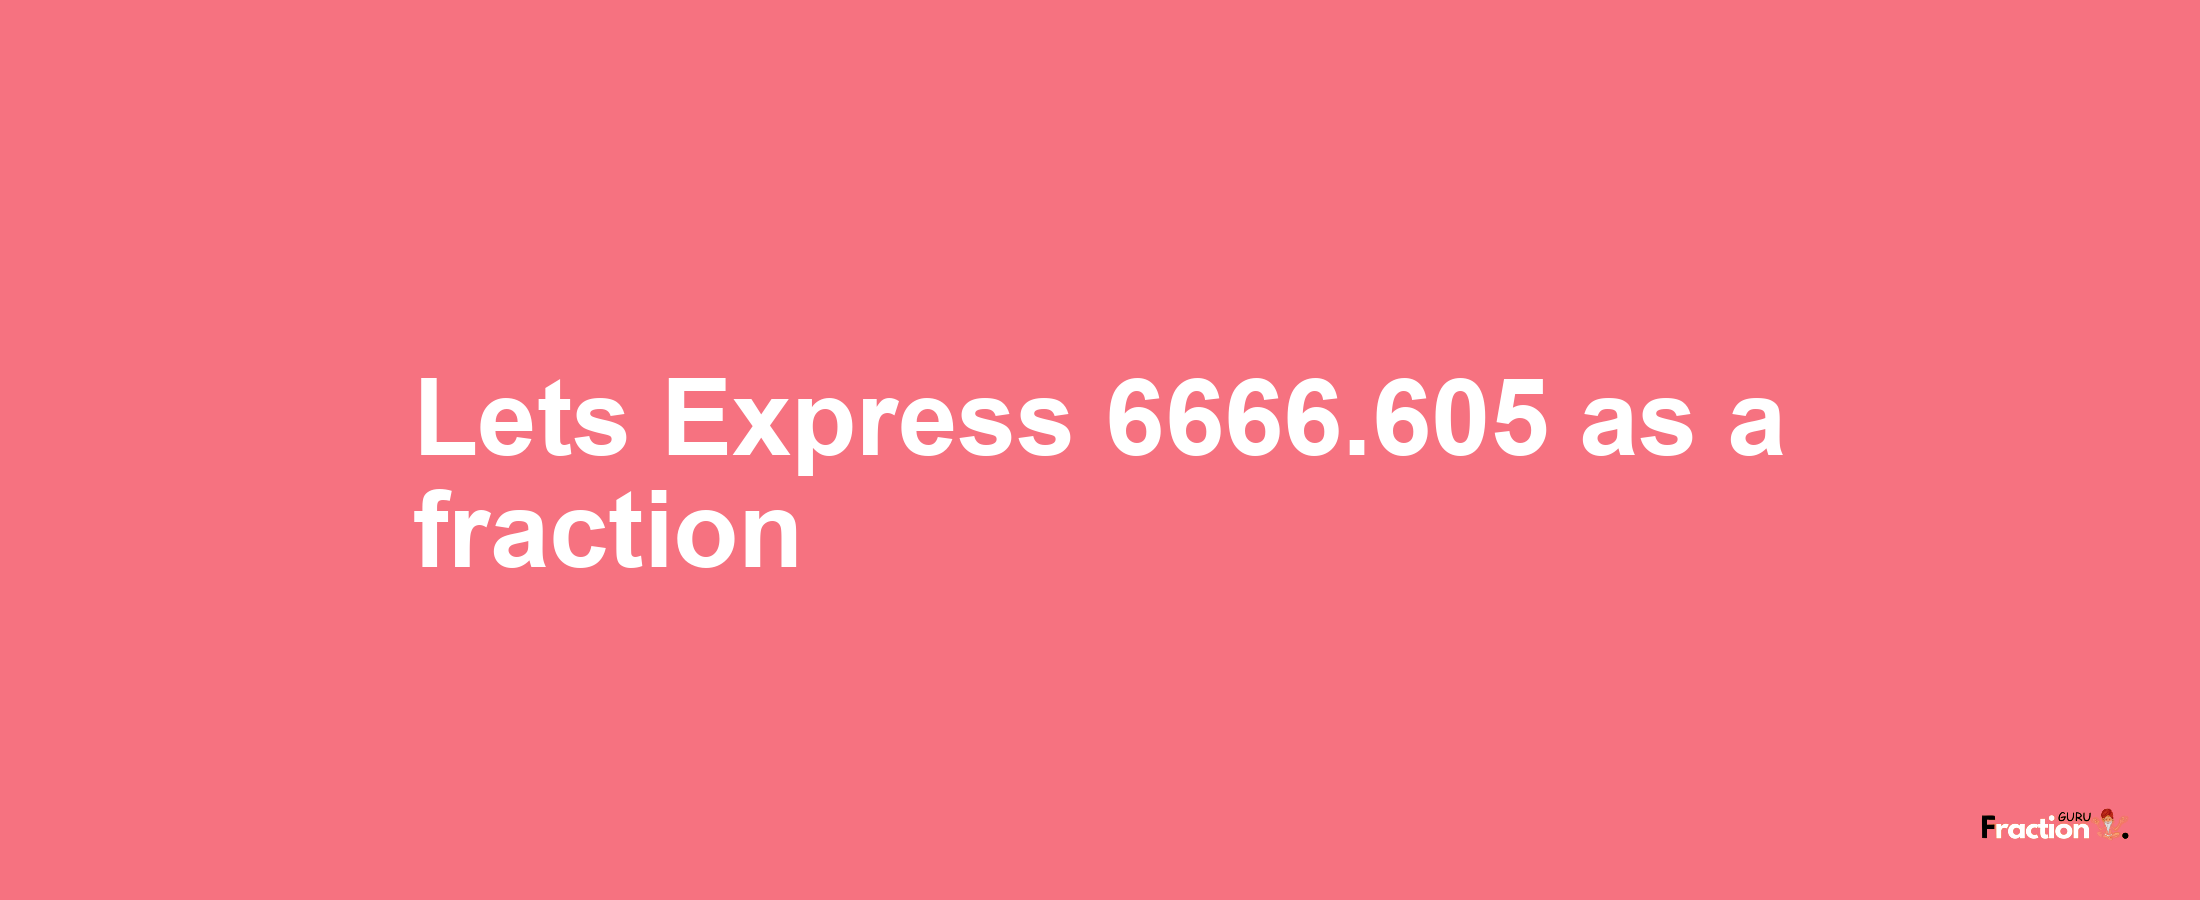 Lets Express 6666.605 as afraction